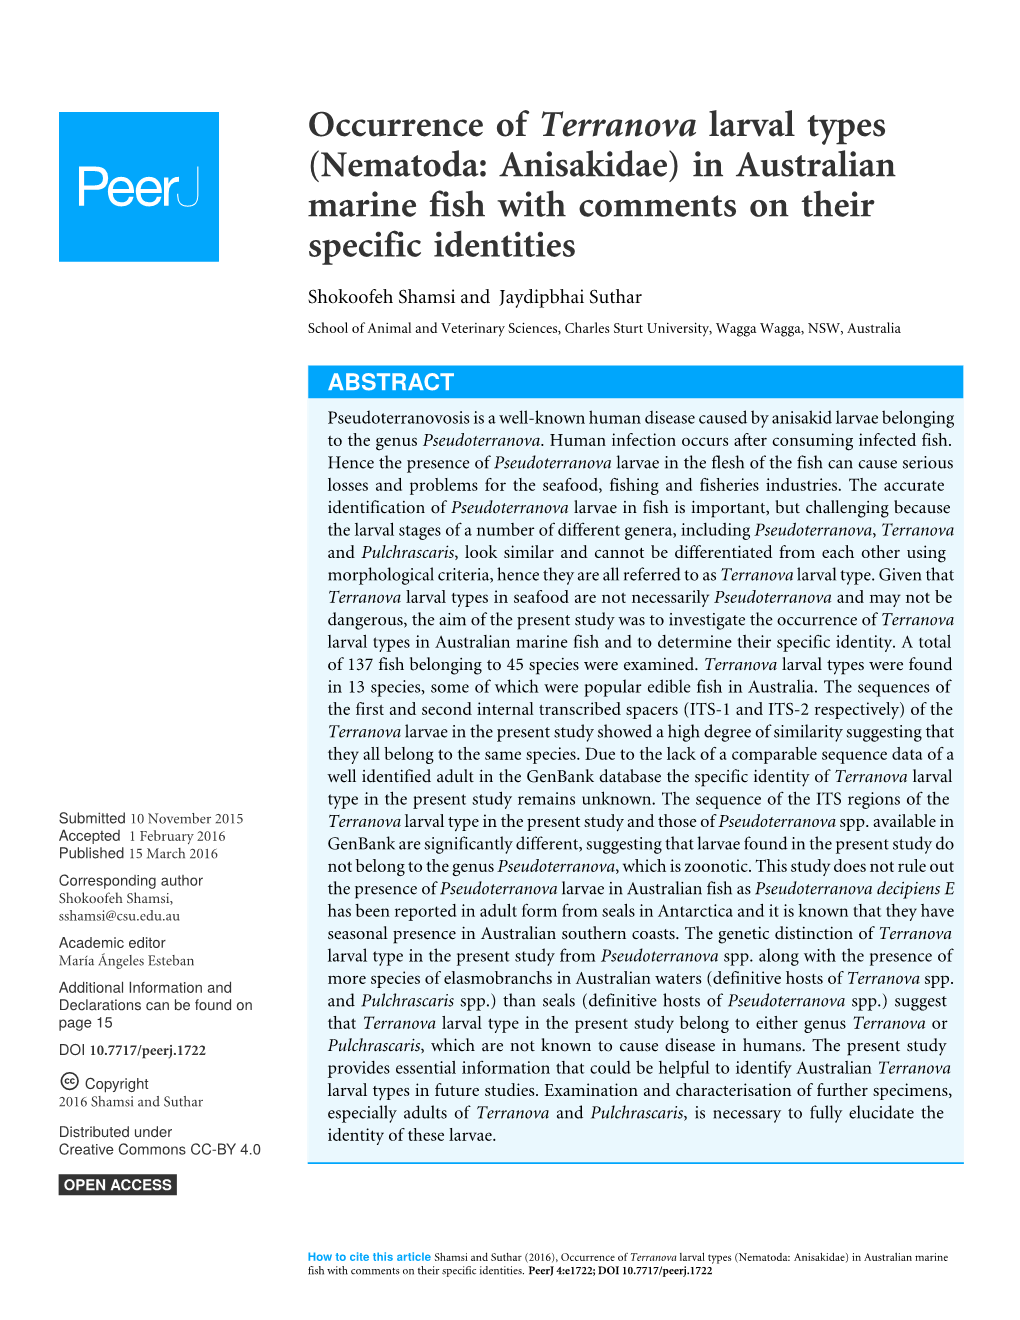 Nematoda: Anisakidae) in Australian Marine Fish with Comments on Their Specific Identities